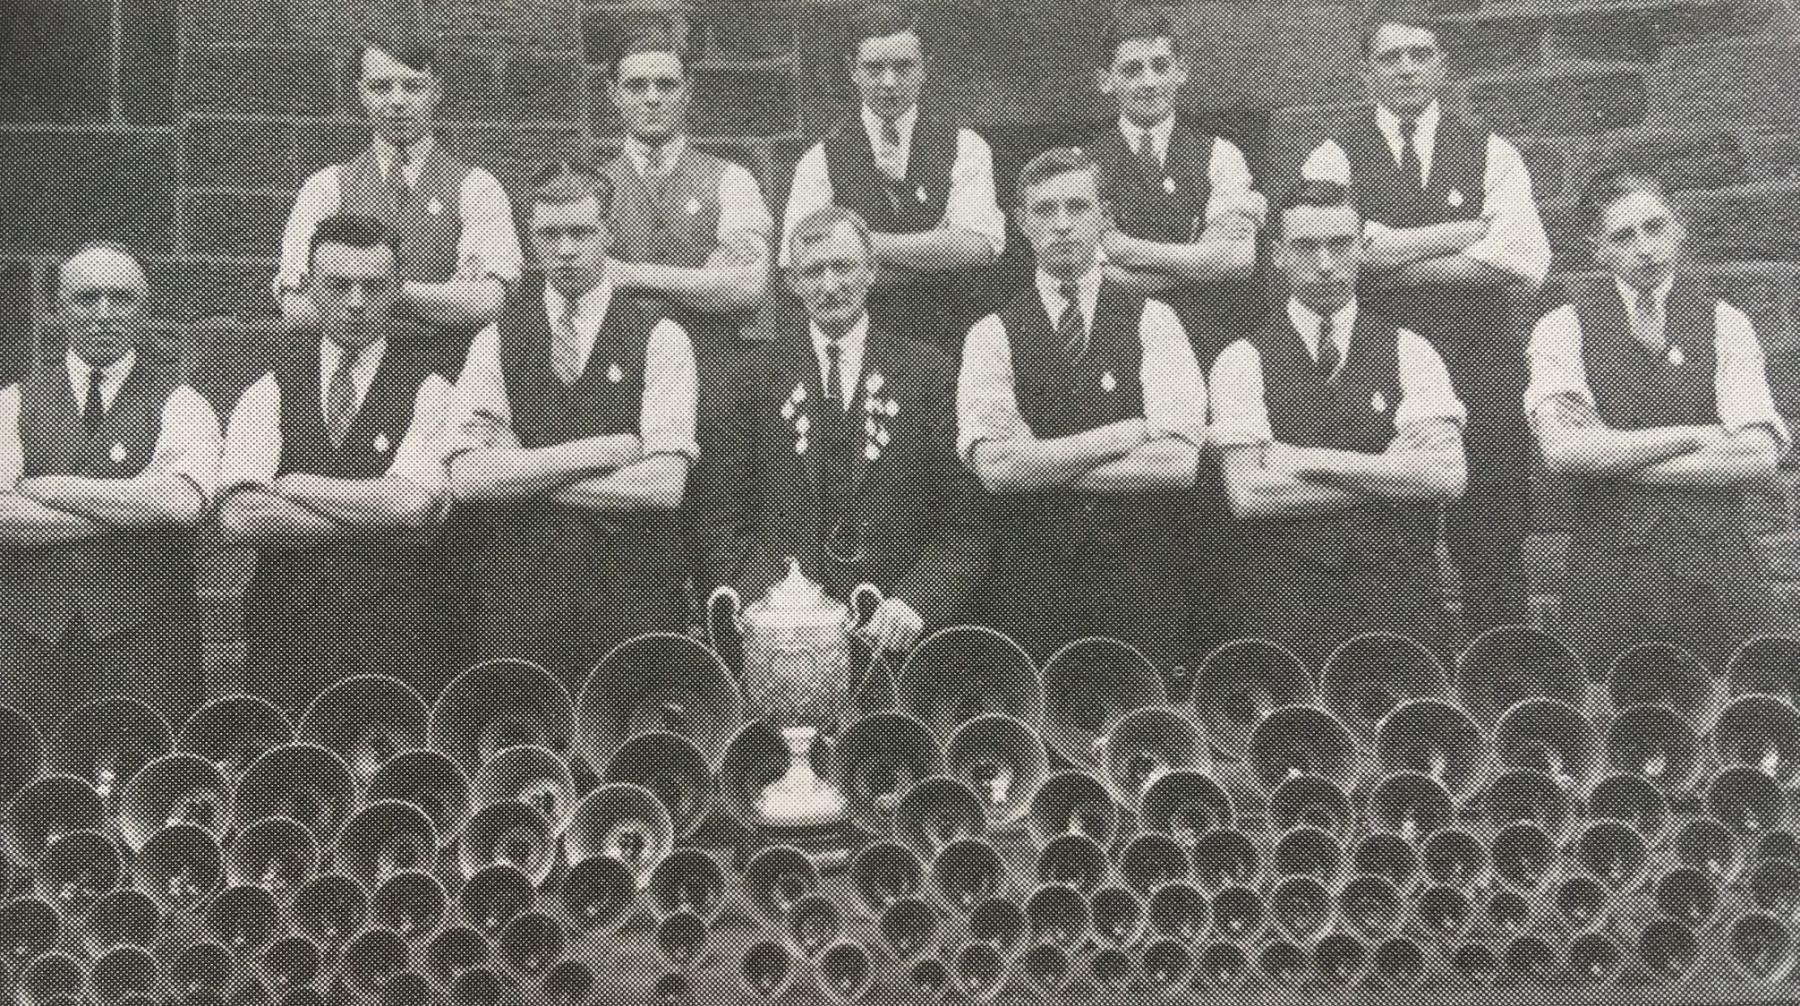 Winners of the English Championships in 1930. Back row- L. Sykes, C. Mitchell, N. Crossland, M. Walshaw, E. Wood. Front row- T. Sykes, M. Beard, R. Lees, F. Taylor, C. Latimer, H. Beard and J. Beever.